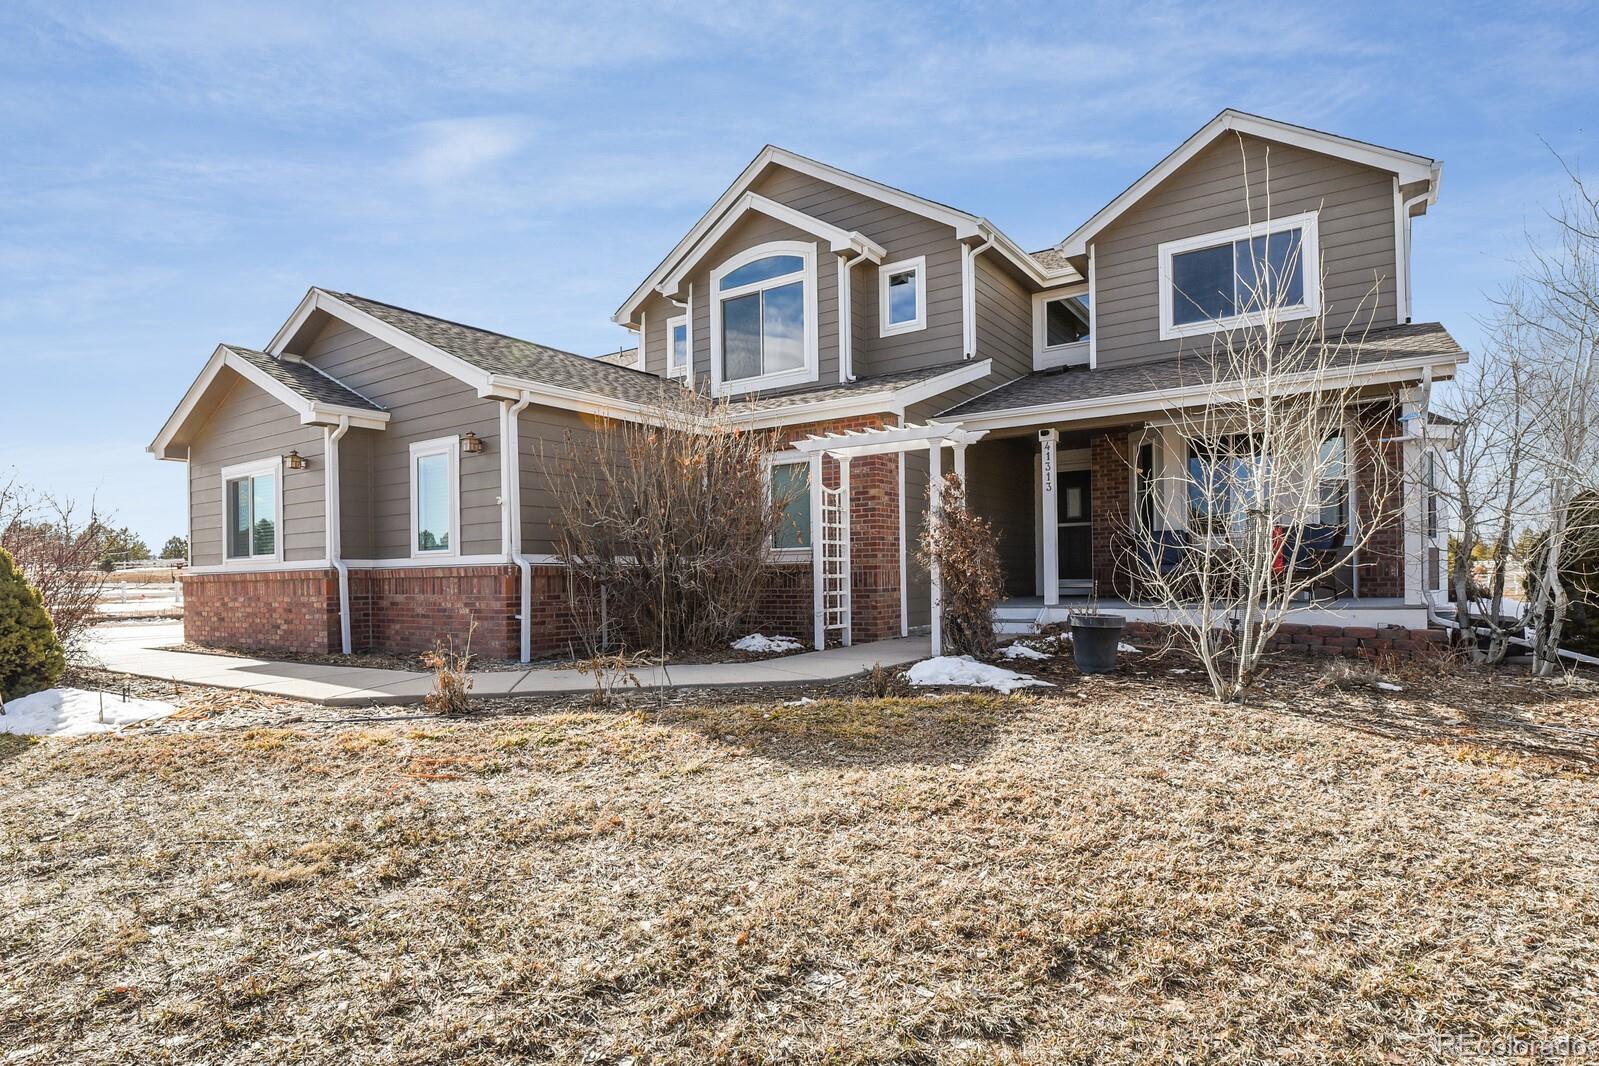 Report Image for 41313 S Pinefield Circle,Parker, Colorado